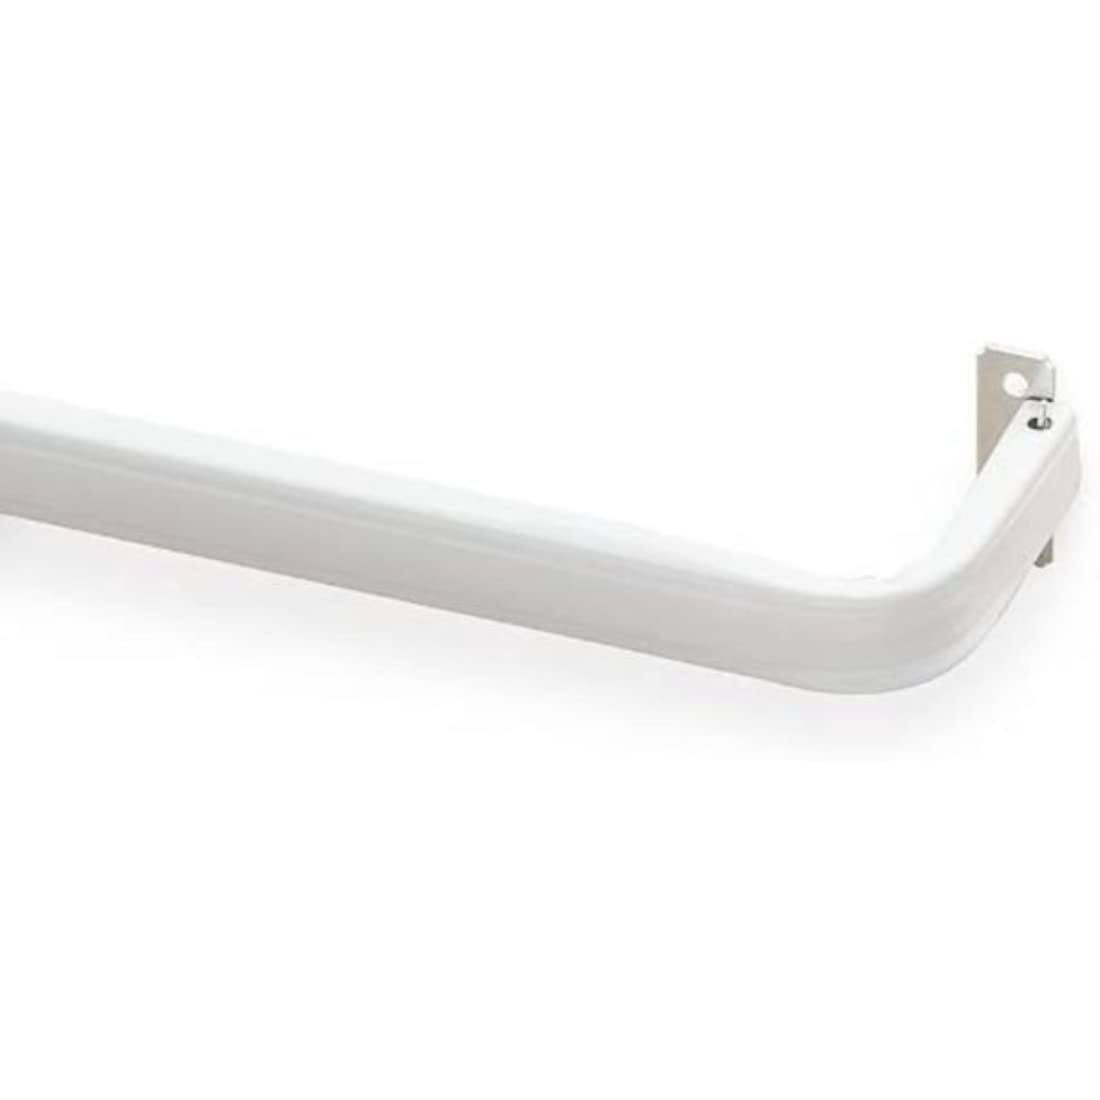 48 inch to 86 inch - Kirsch Super Duty Lockseam Curtain Rod with 2 inch Clearance, White